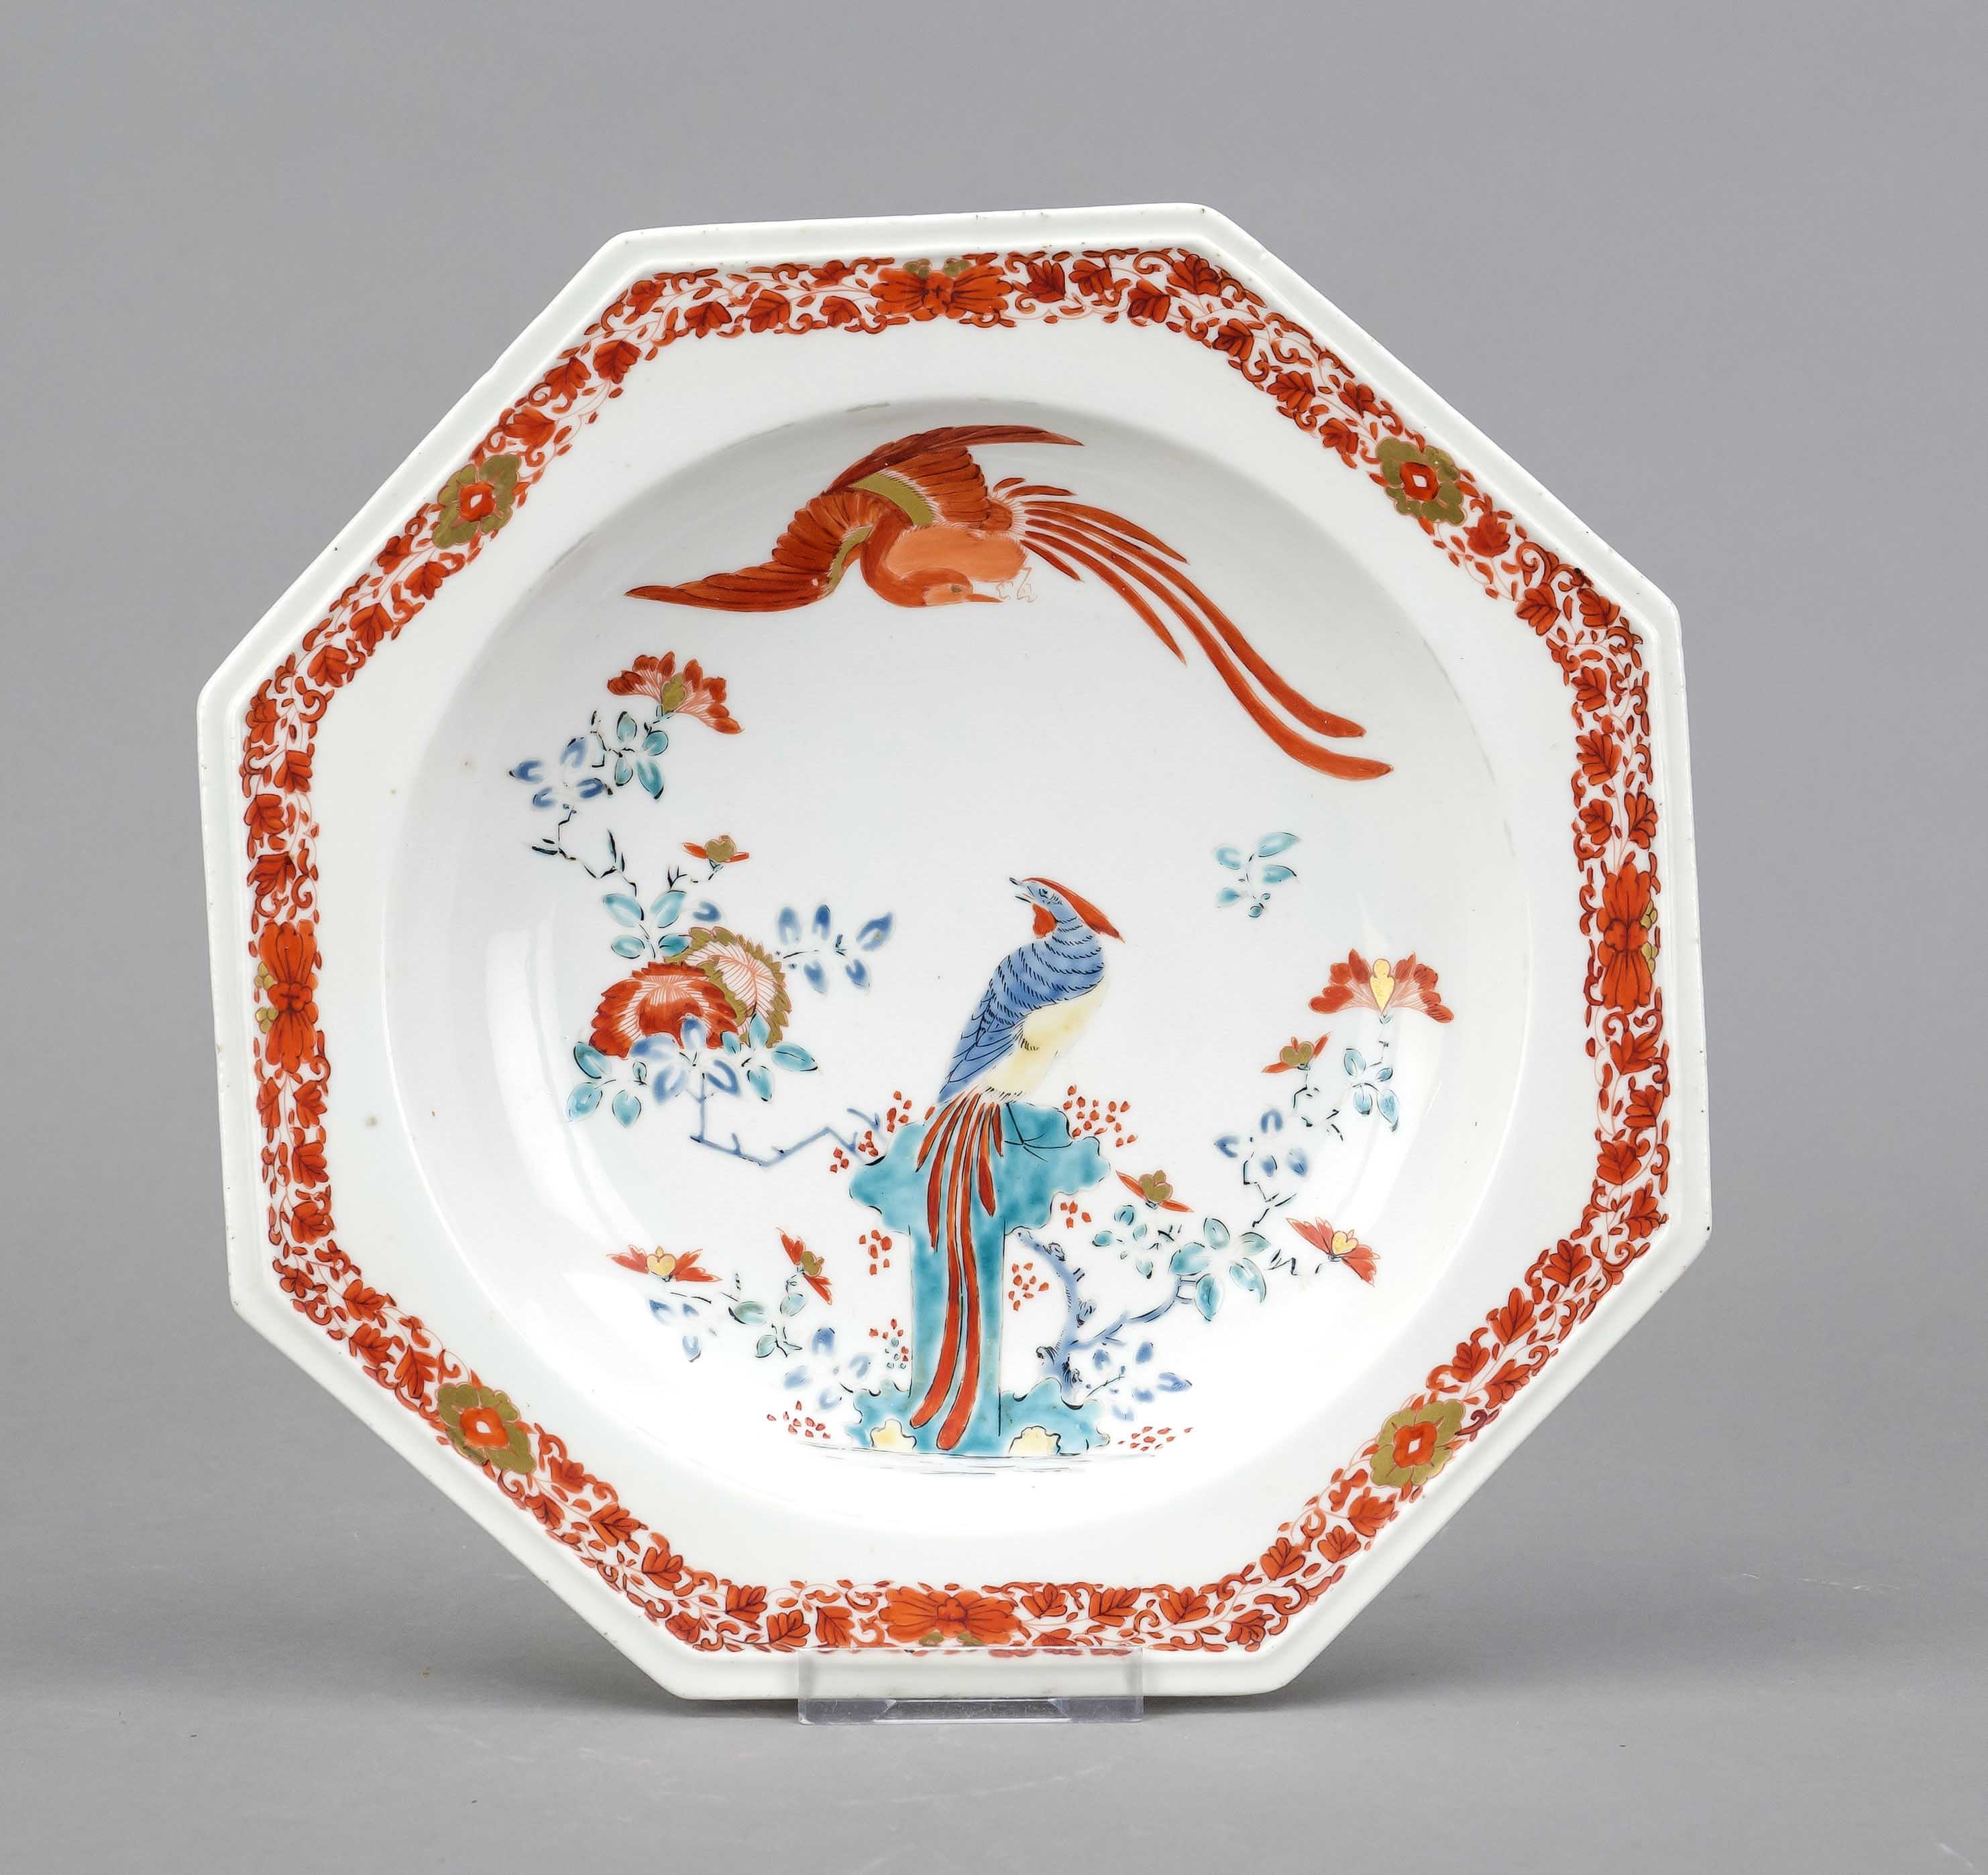 Plate, w. Chelsea or Bow, England, 18th century, octagonal shape, polychrome Kakiemon painting in